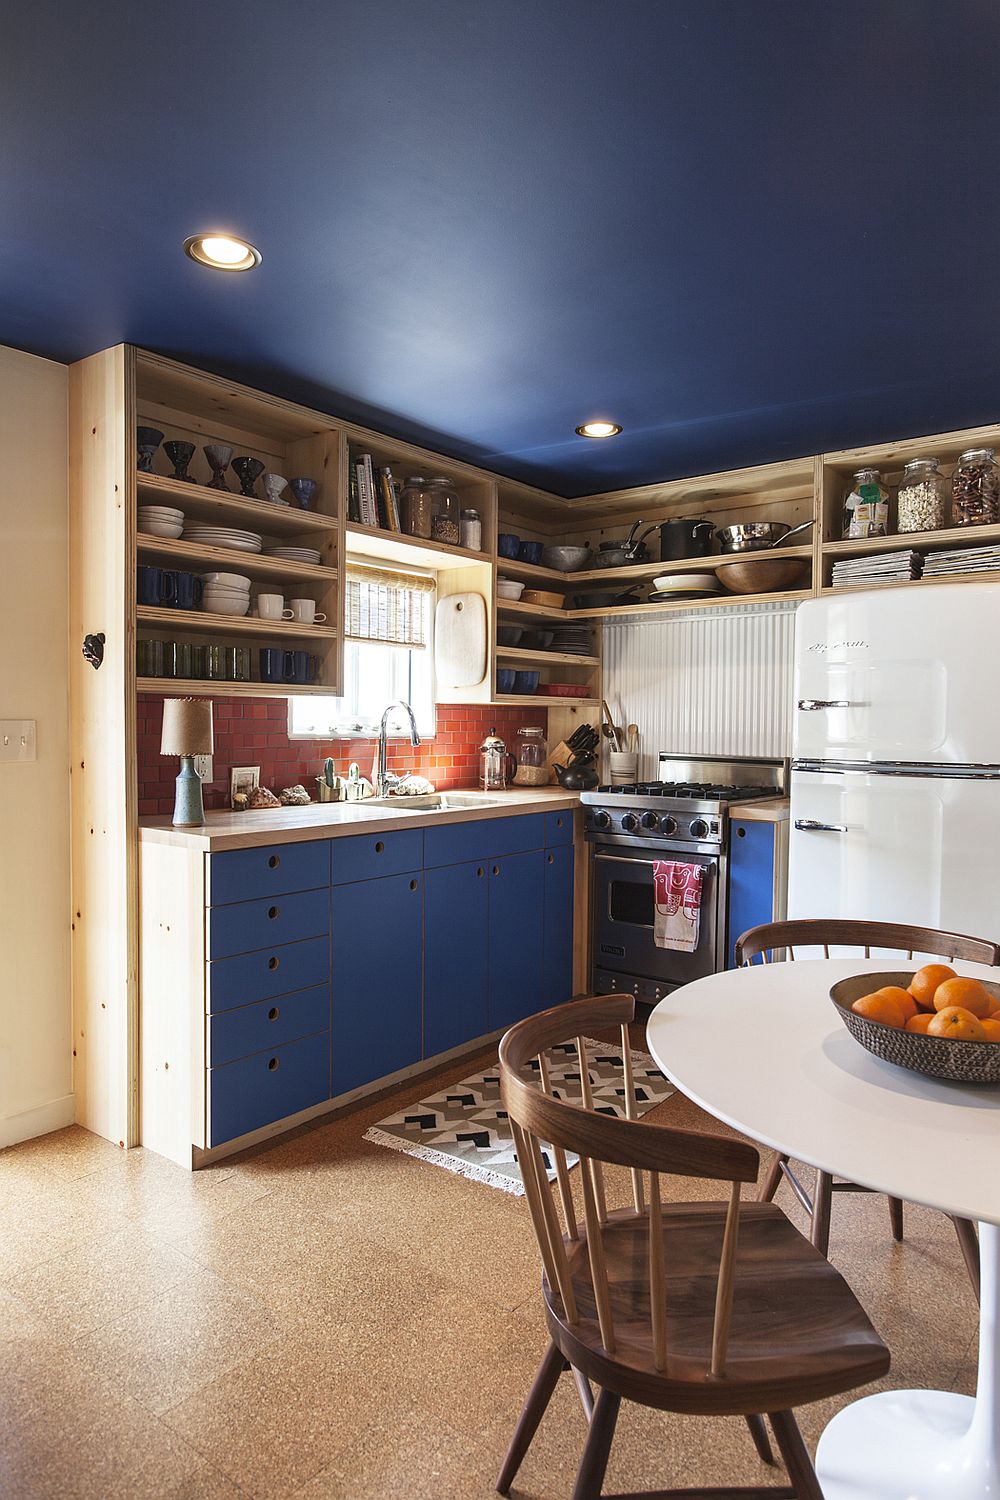 Blue cabinets in the kitchen add to the colorful appeal of the trailer home with a striking blue ceiling